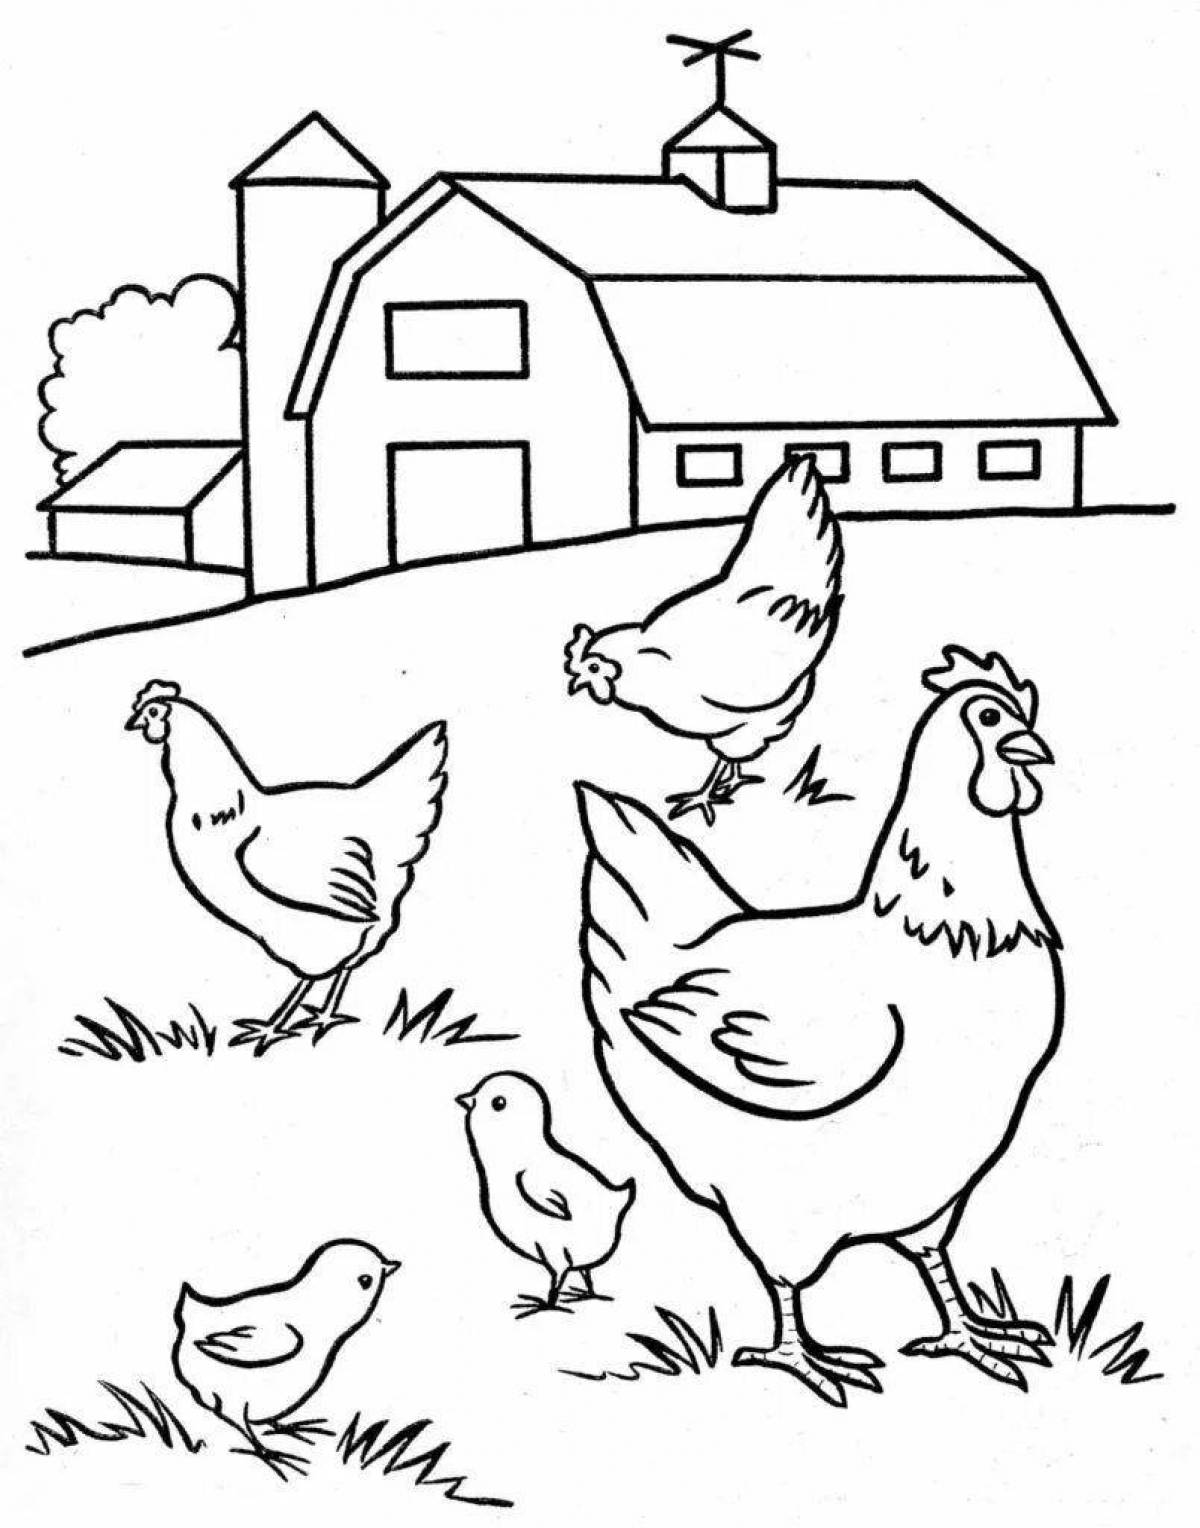 Fancy animal house coloring page